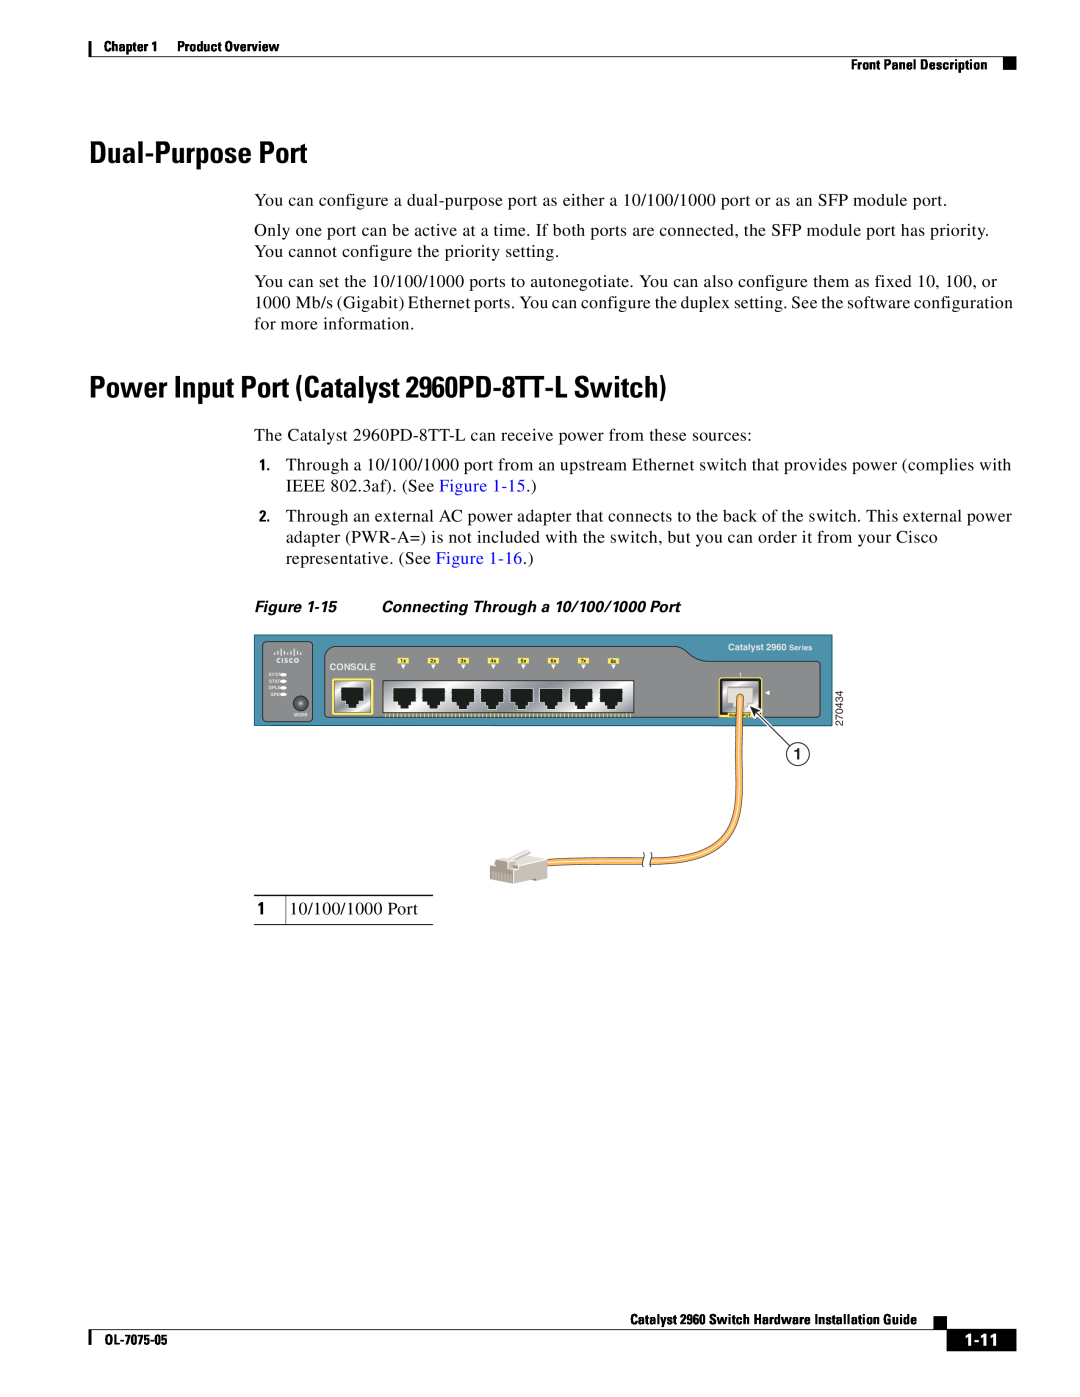 Cisco Systems specifications Dual-Purpose Port, Power Input Port Catalyst 2960PD-8TT-L Switch, 1-11 